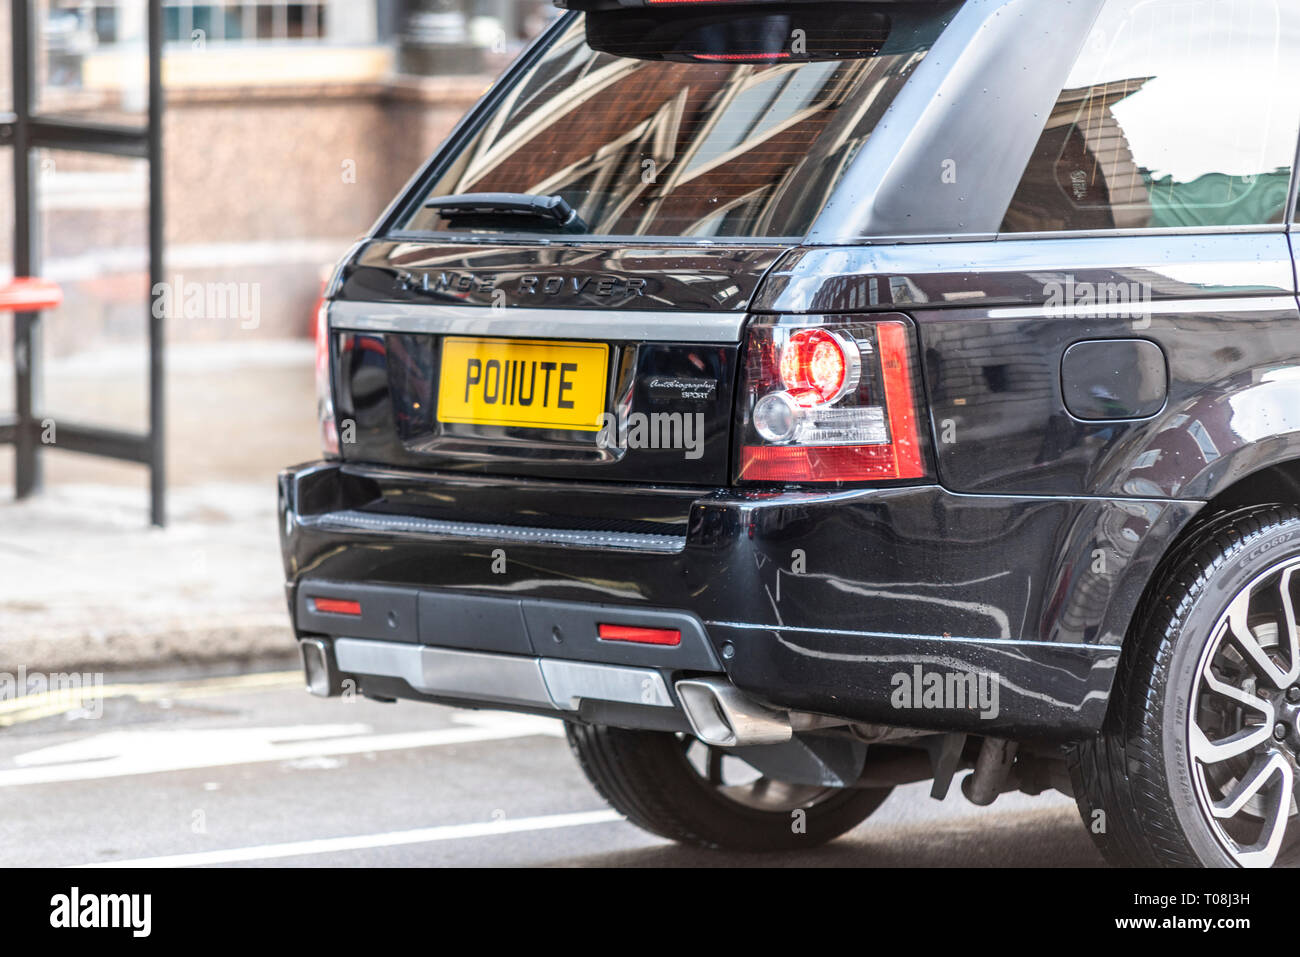 Pollute, a Range Rover car with registration number PO11UTE spaced to look like the word pollute. London traffic pollution. Emissions. Climate Stock Photo